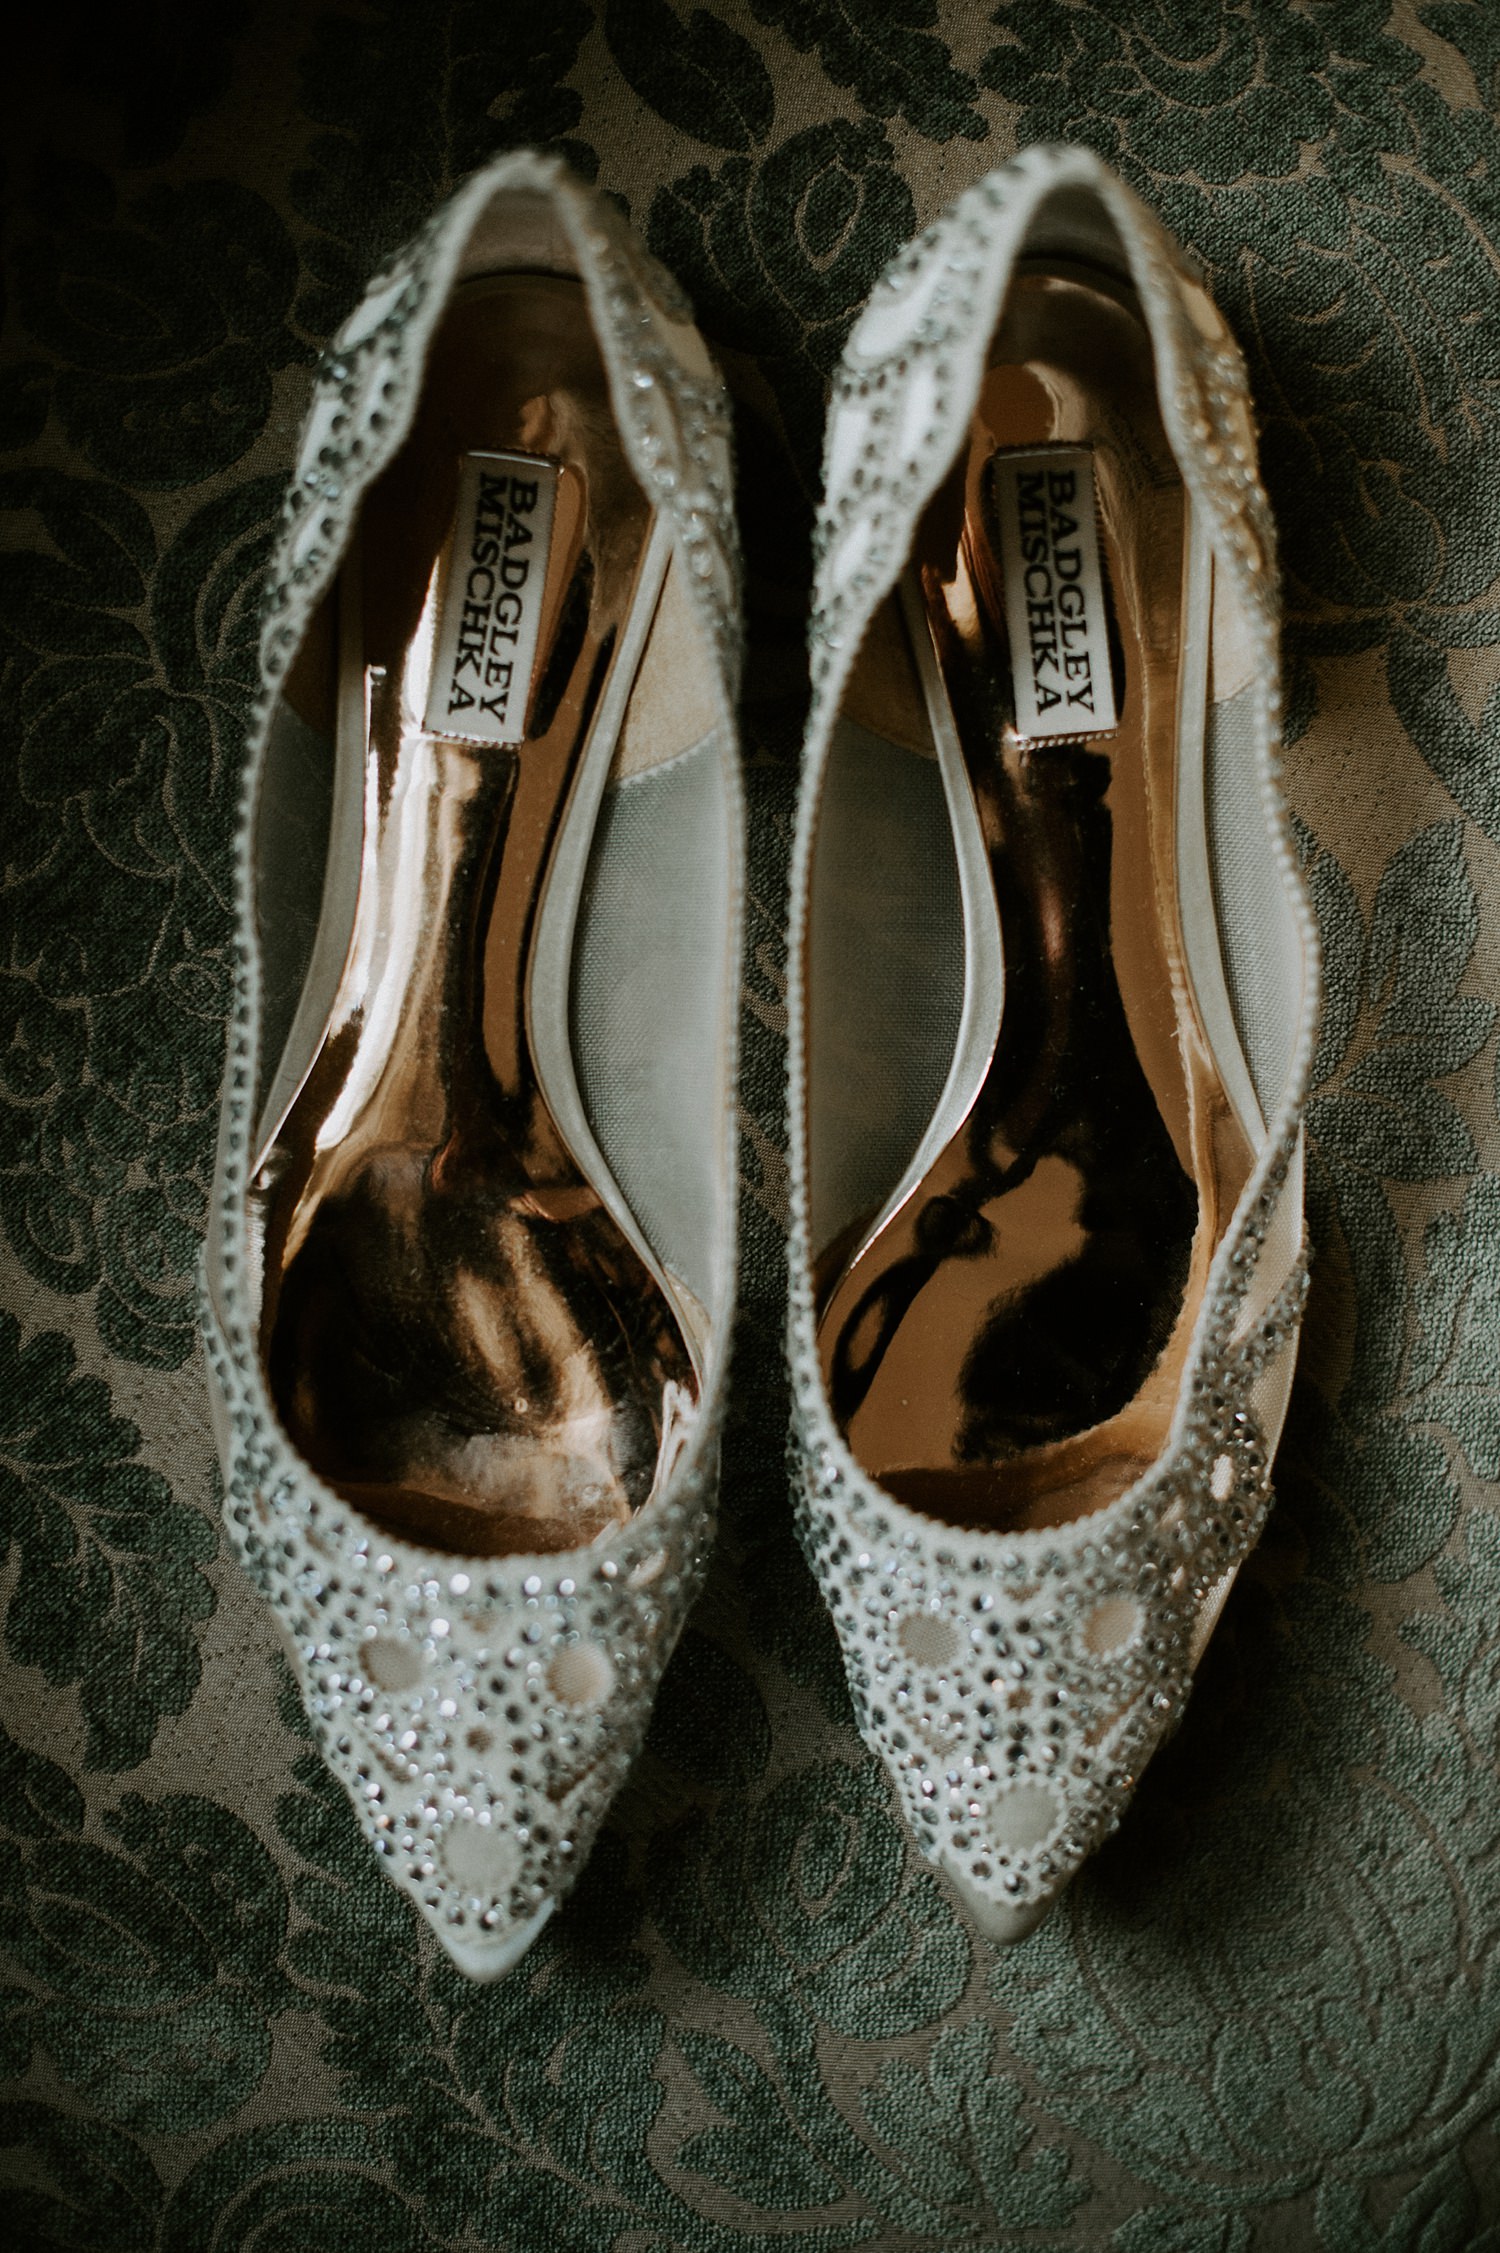 Lace wedding shoes via Jubilee Events